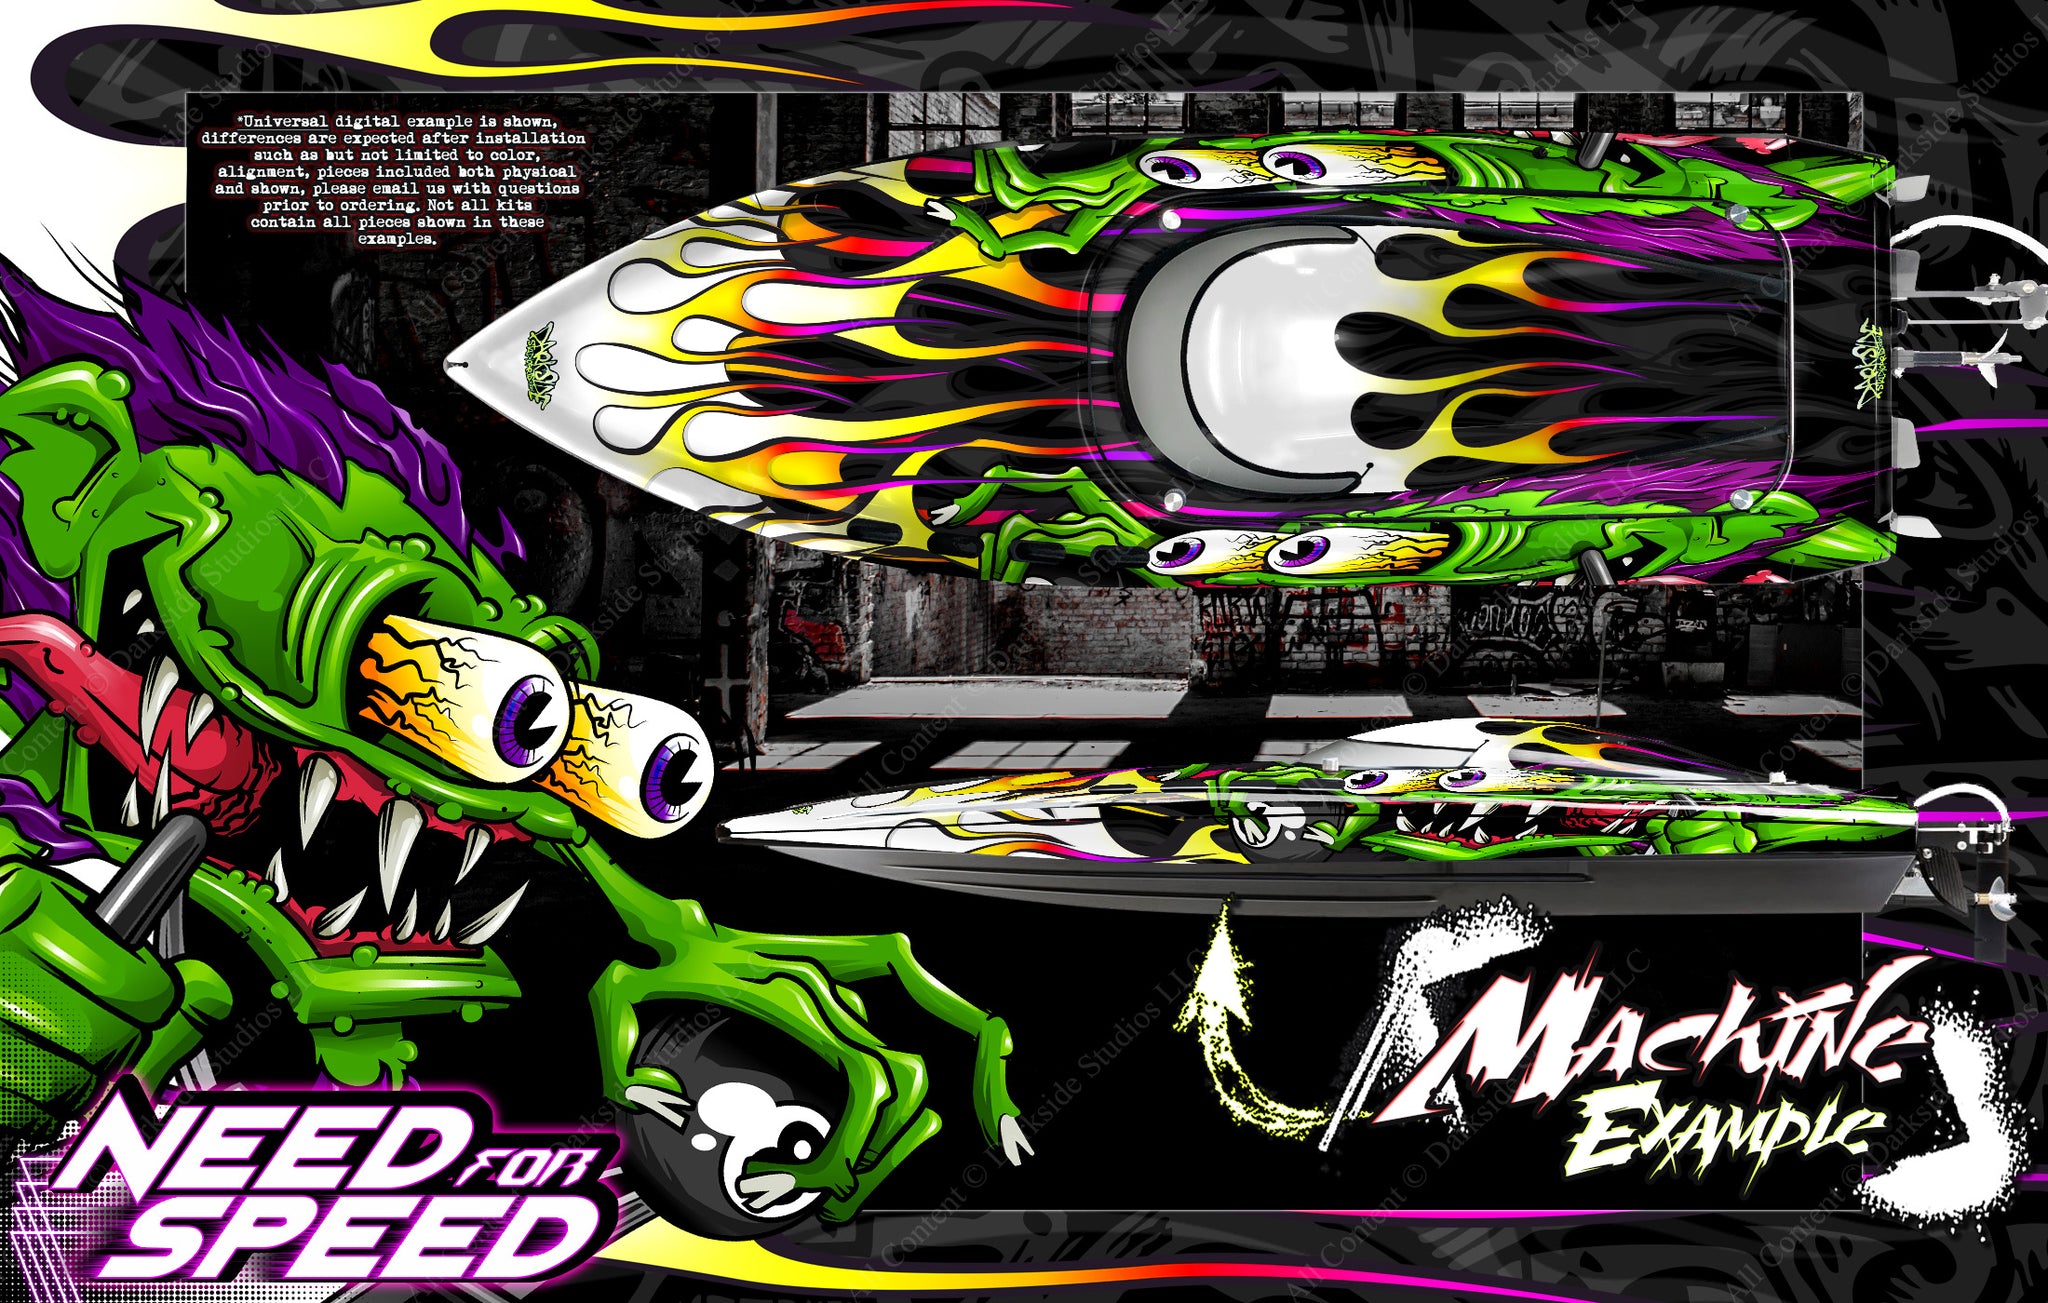 Need For Speed' Rat Fink Custom Graphics Skin Wrap Fits Pro Boat